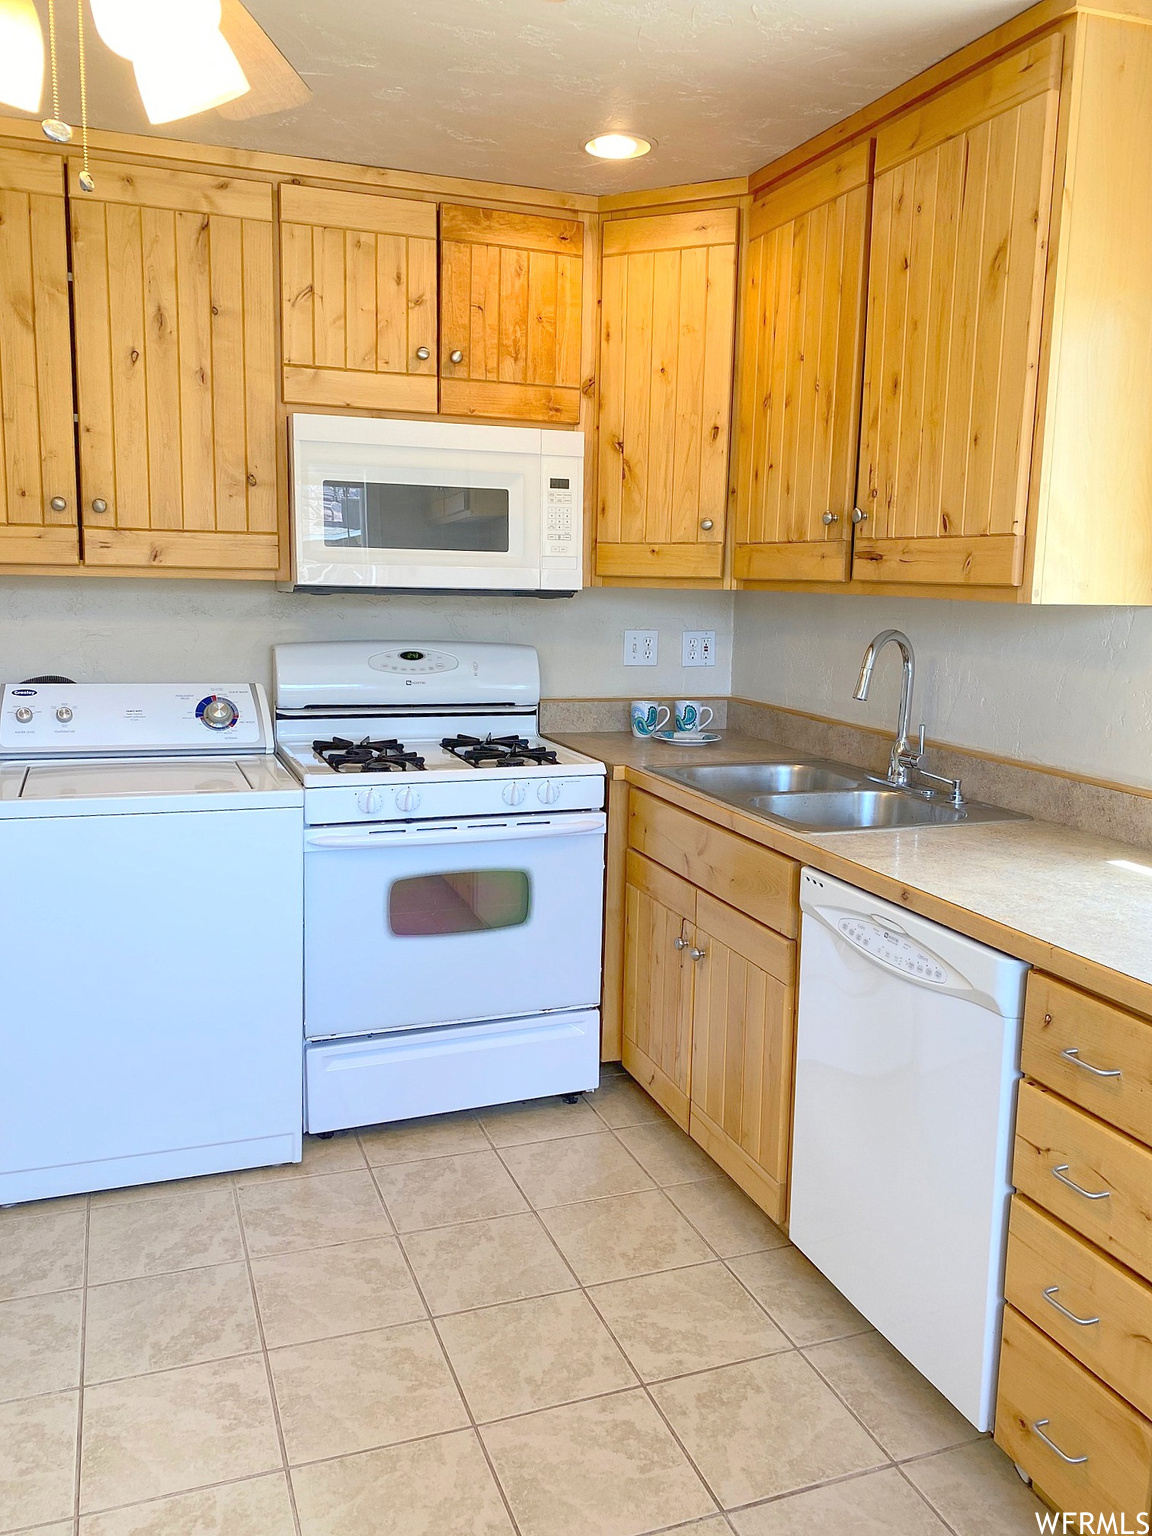 Kitchen featuring white appliances, sink, light tile floors, and washer / clothes dryer